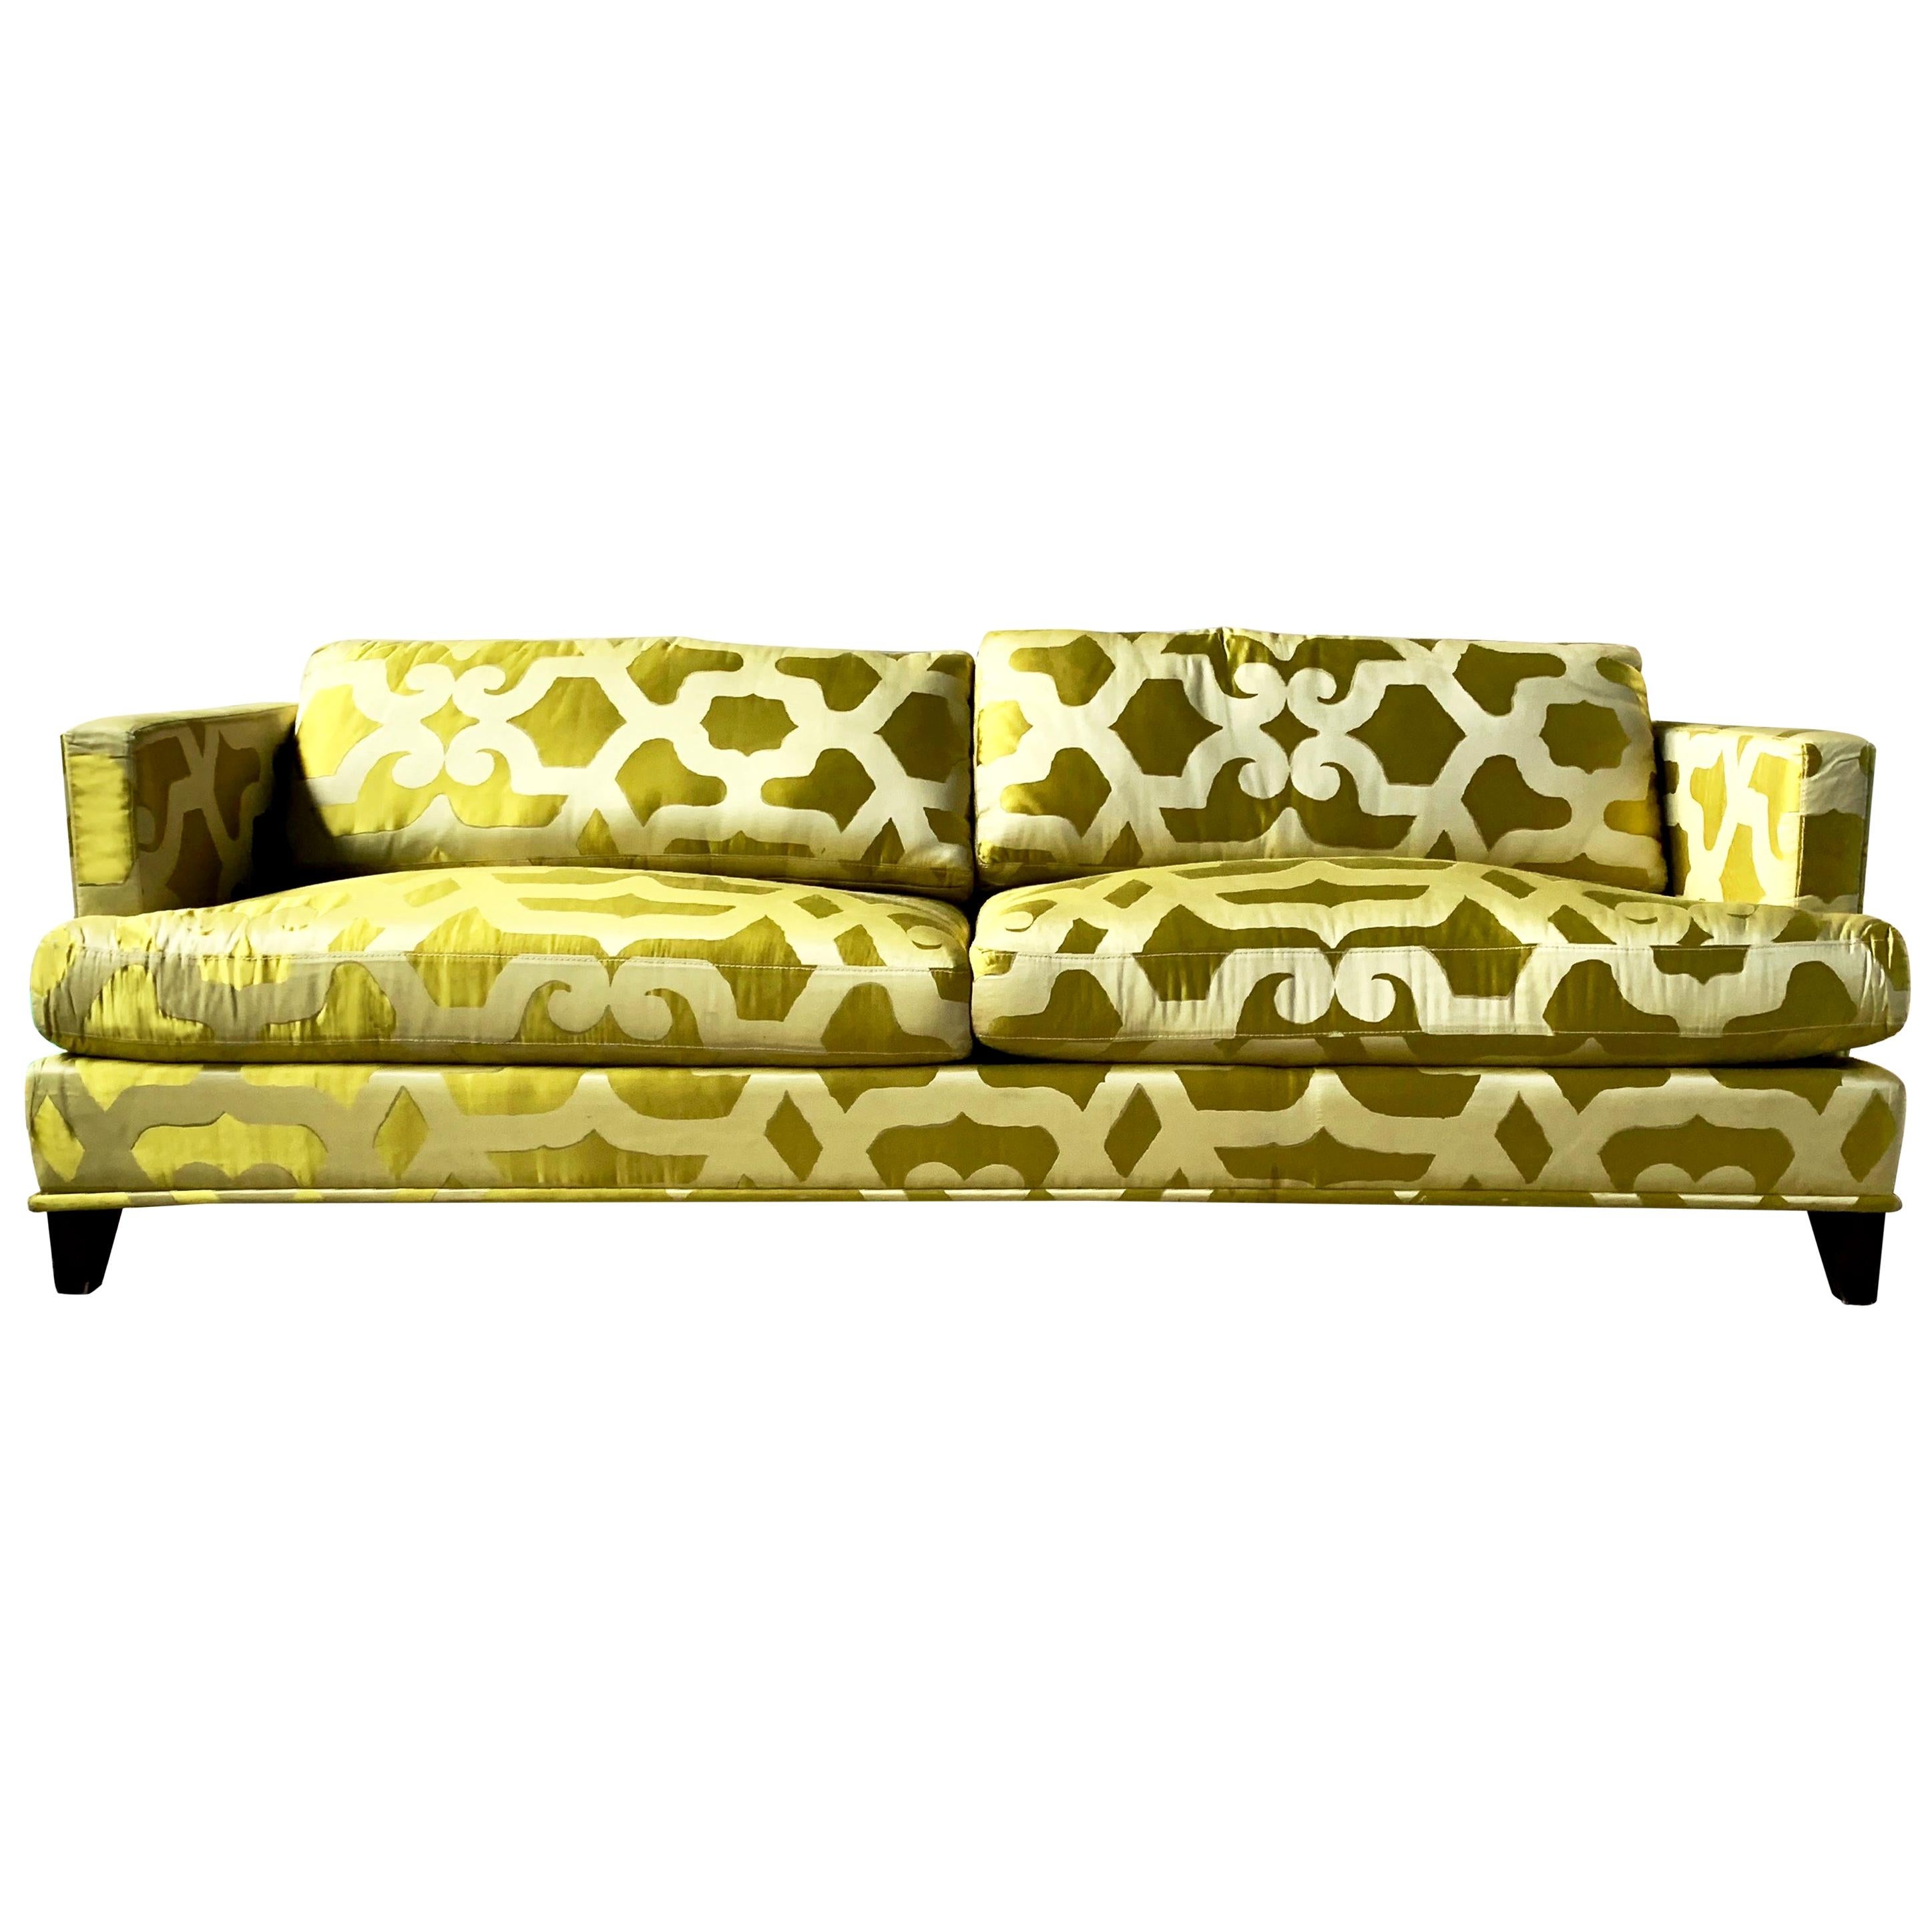 French Chartreuse Silk Quatrefoil 3-Seat Sofa Kravet Couture, Yellow Green Couch